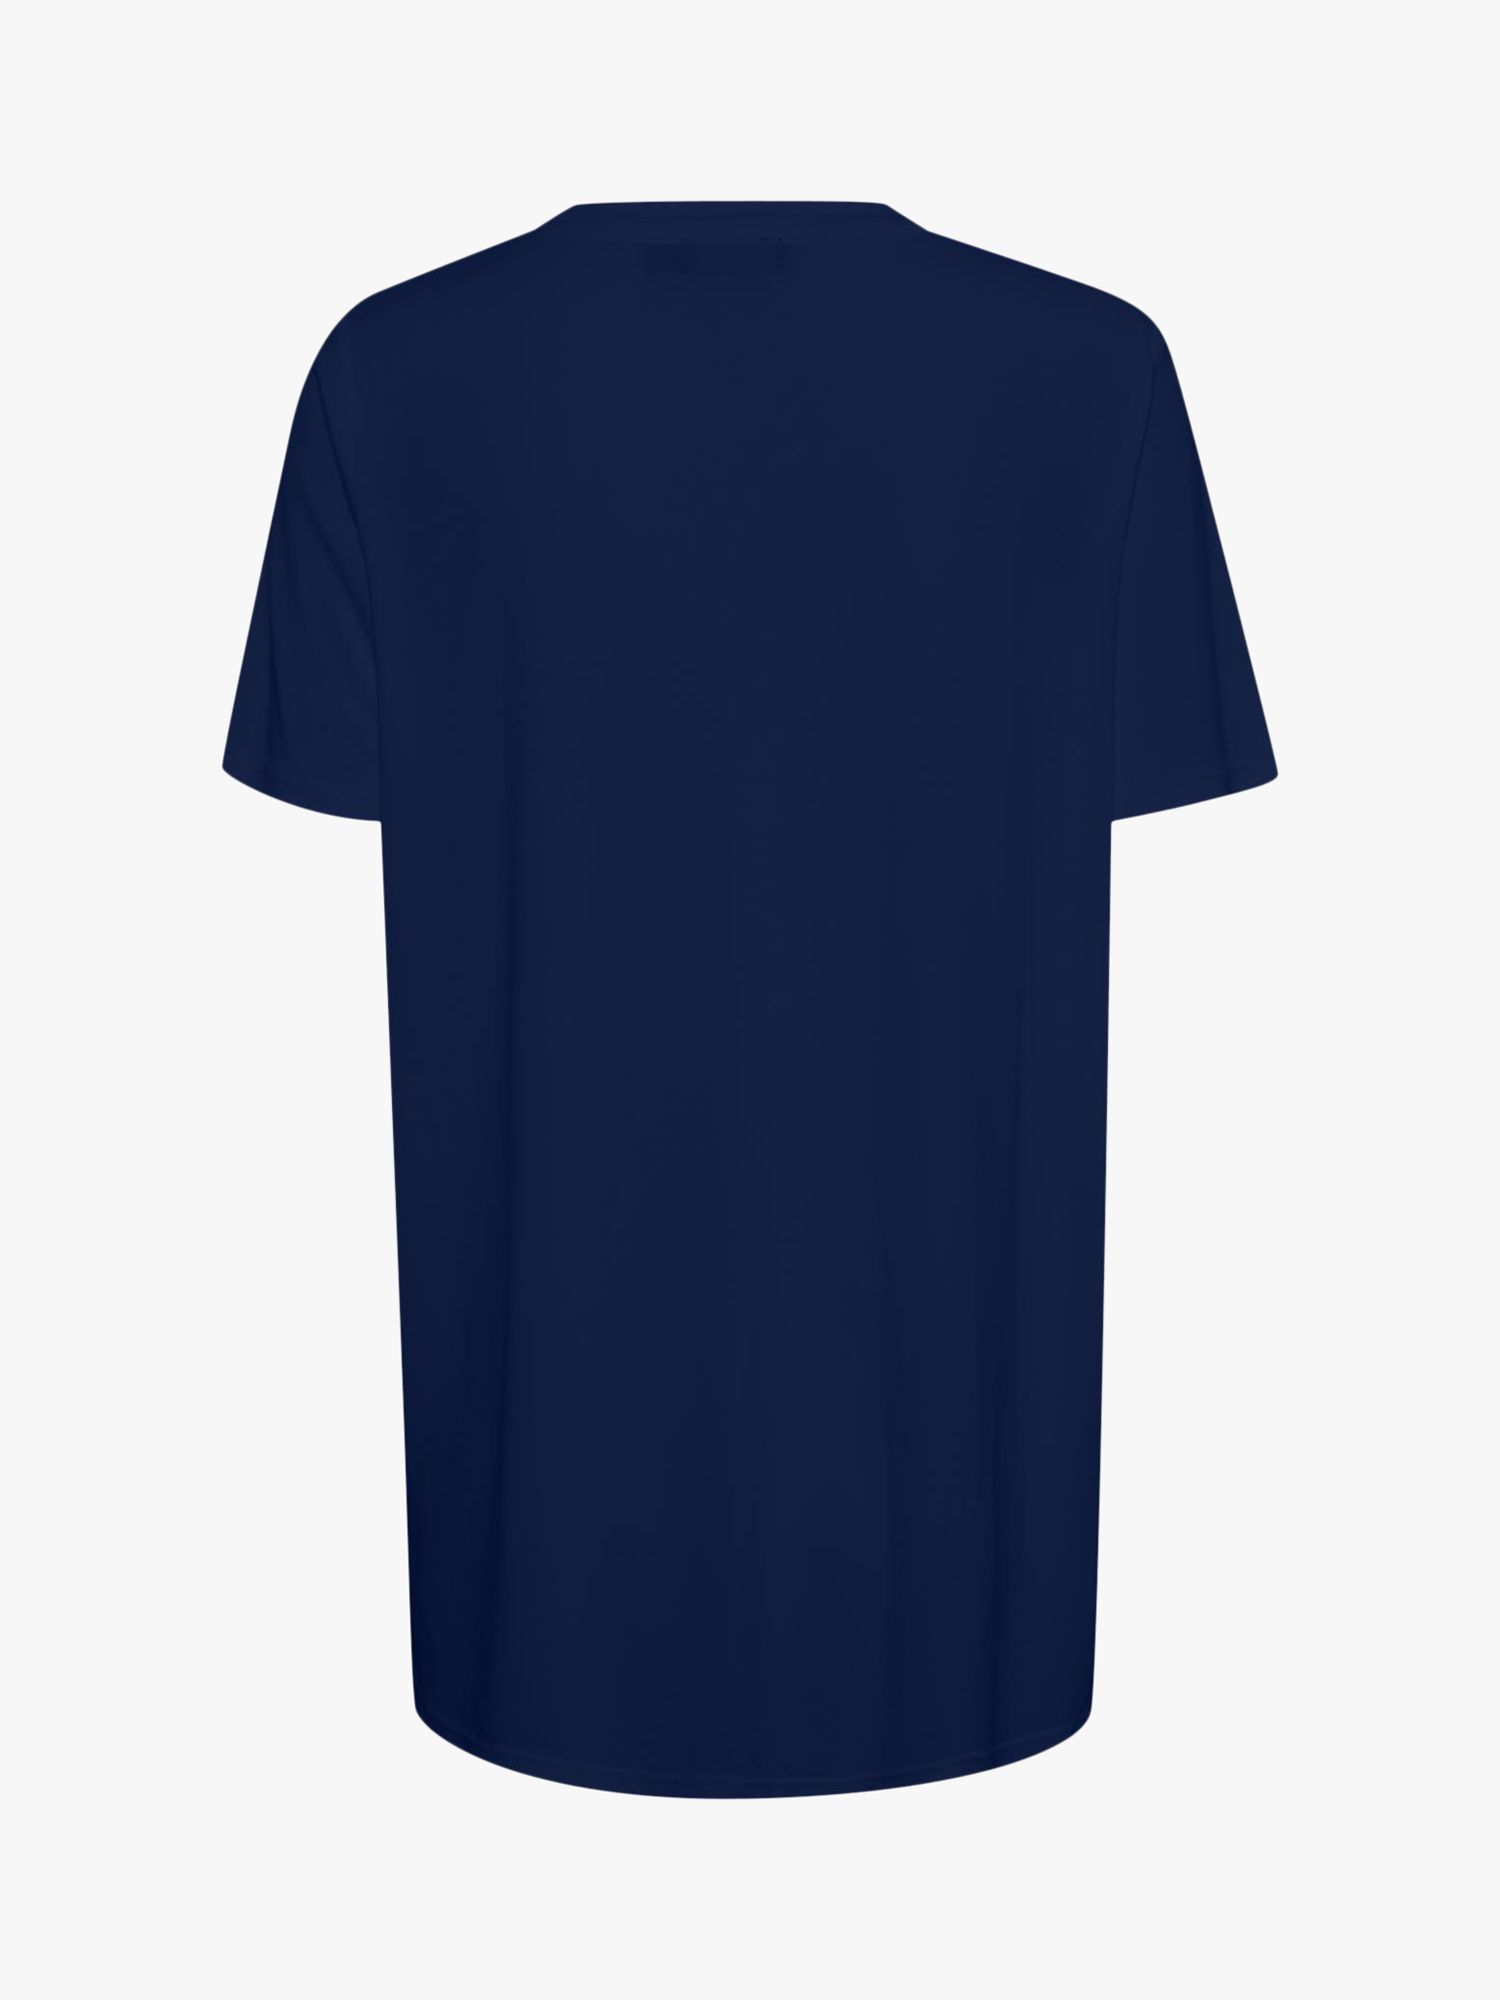 Buy Soaked In Luxury Columbine Oversized T-Shirt Online at johnlewis.com